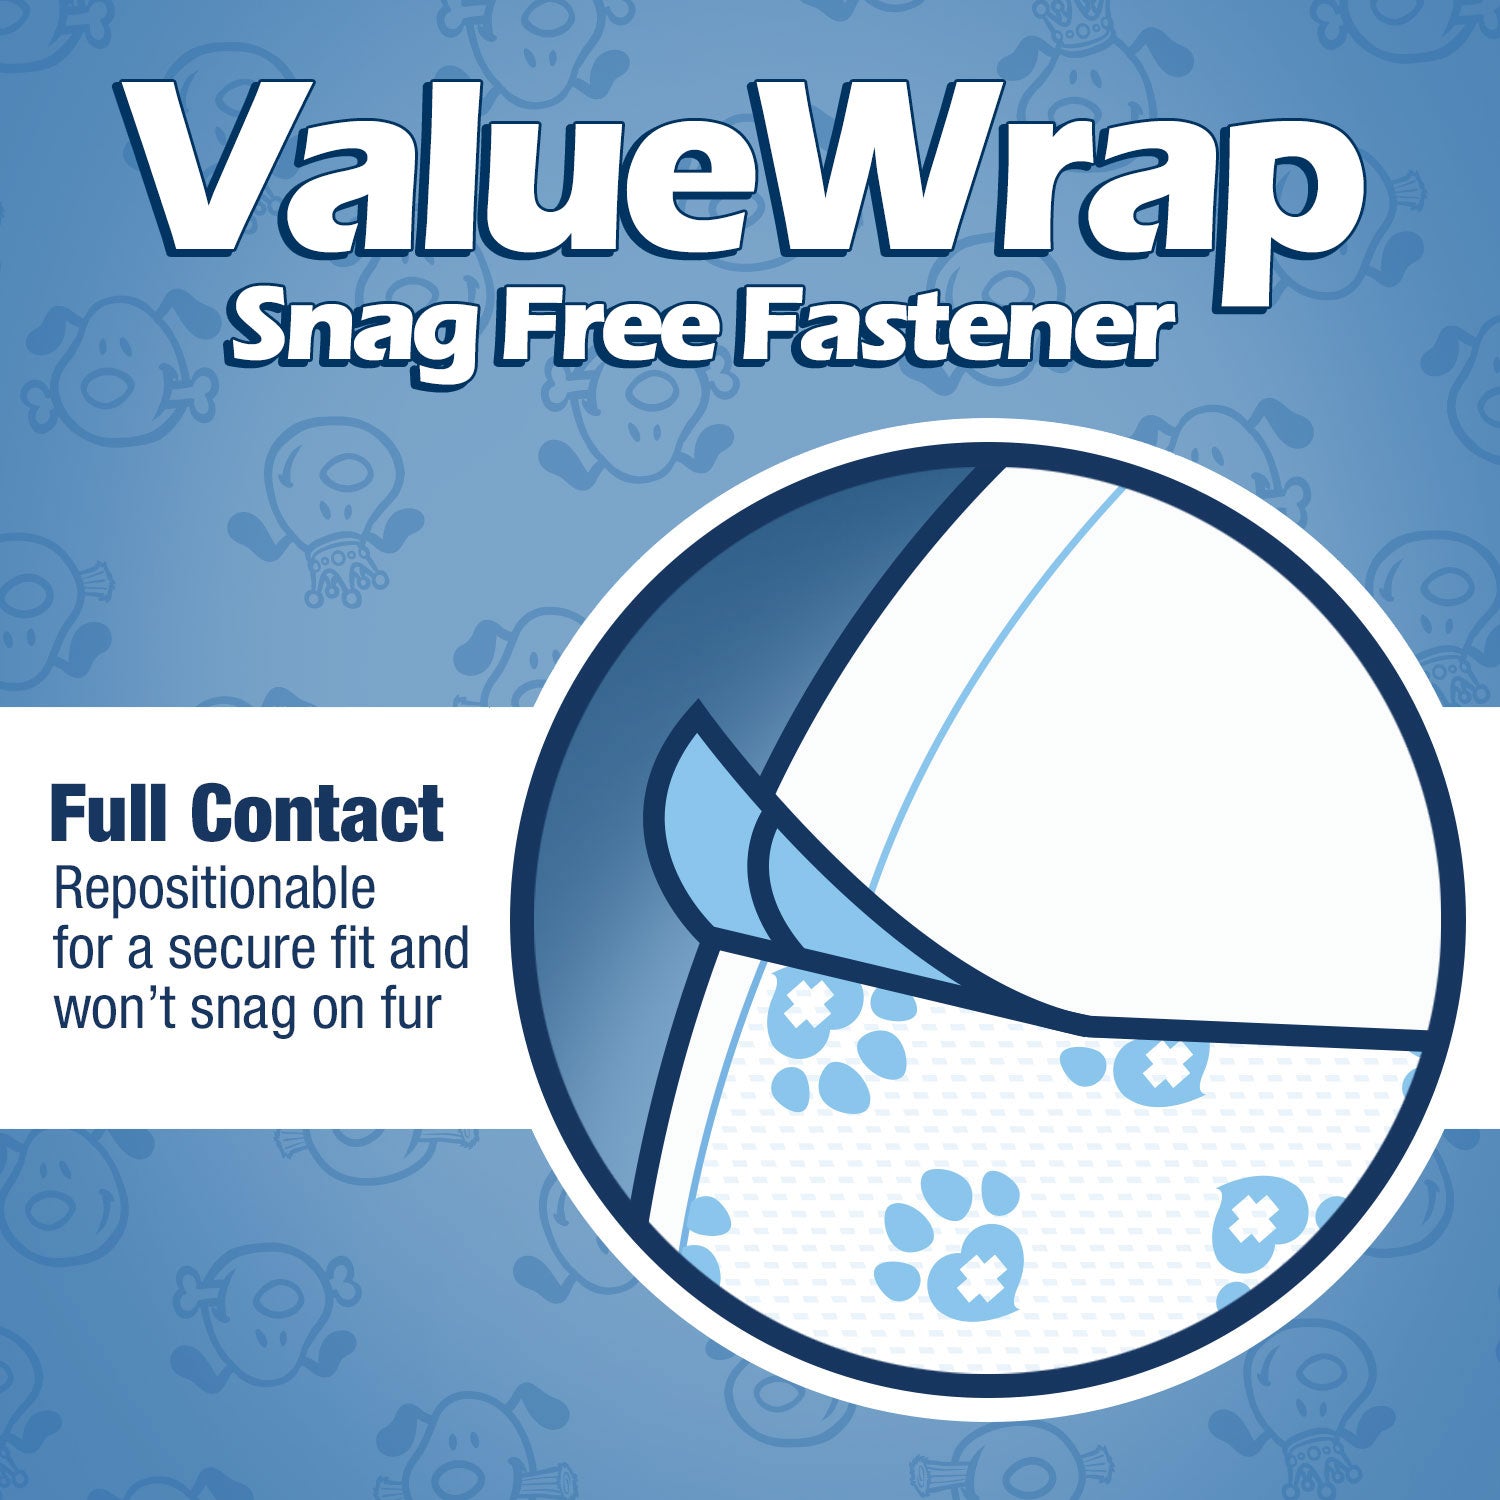 NEW- ValueWrap Male Wraps, Disposable Dog Diapers, 1-Tab Small, Lavender, 576 Count WHOLESALE PACK